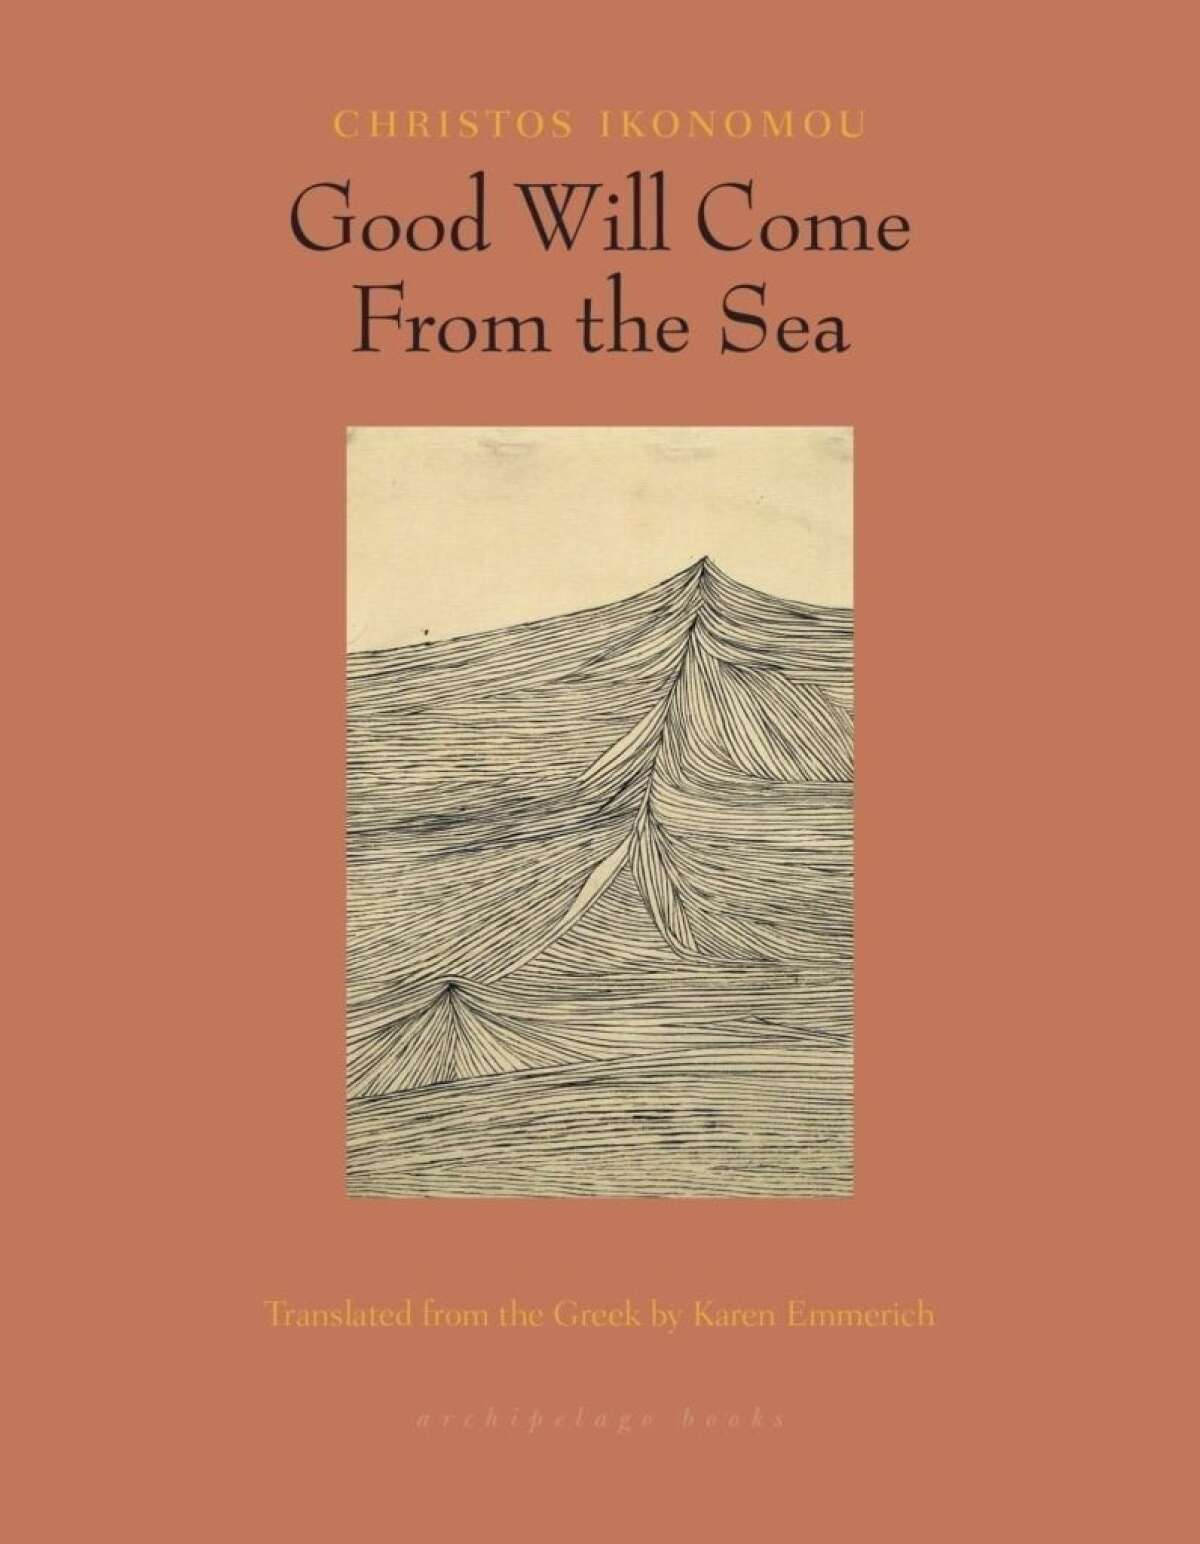 "Good Will Come from the Sea" by Christos Ikonomou